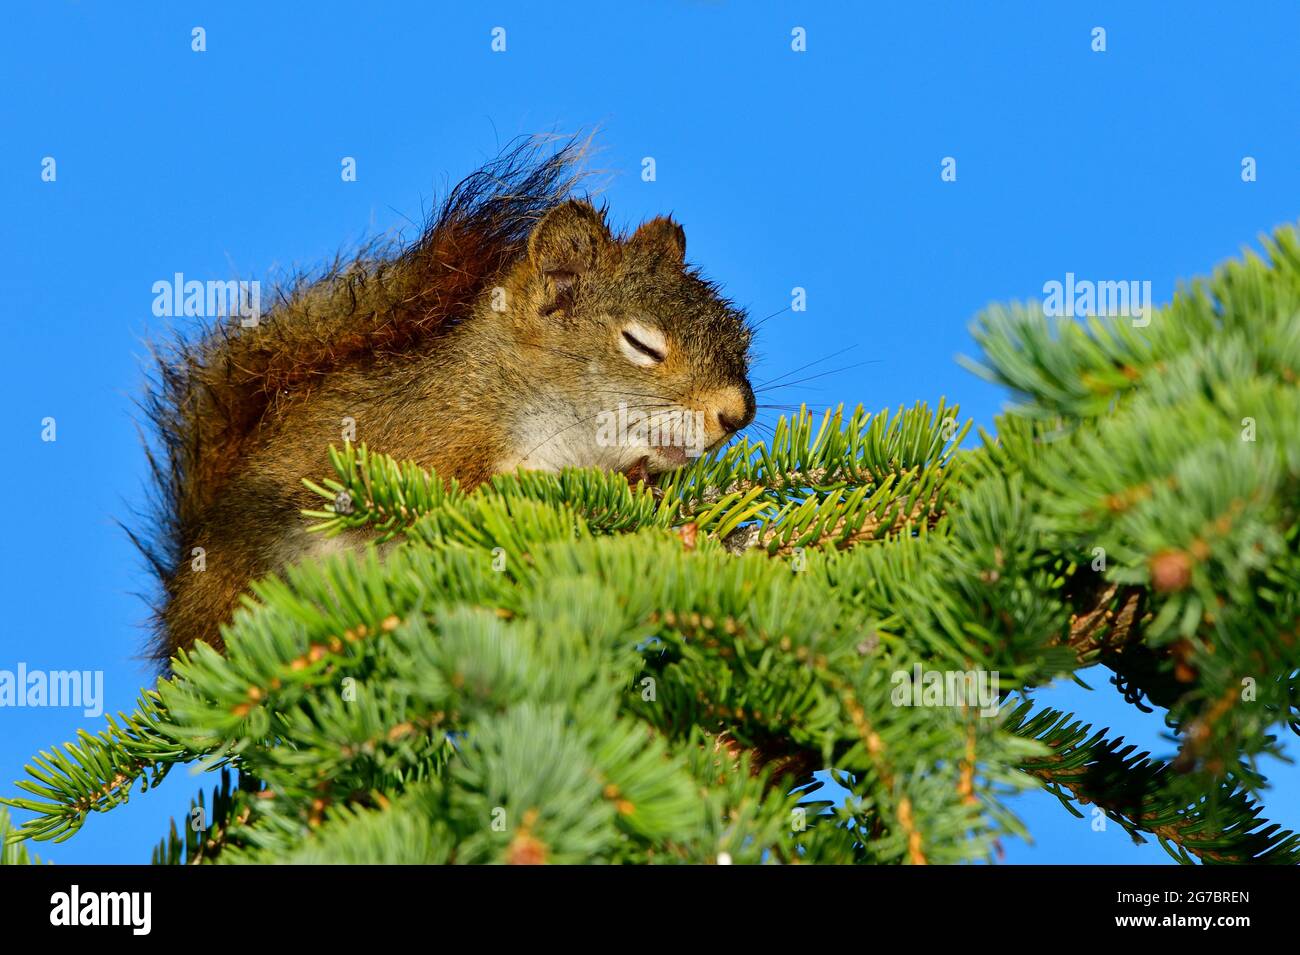 A young red squirrel 'Tamiasciurus hudsonicus', sleeping on a spruce tree branch against a clear blue sky in rural Alberta Canada Stock Photo